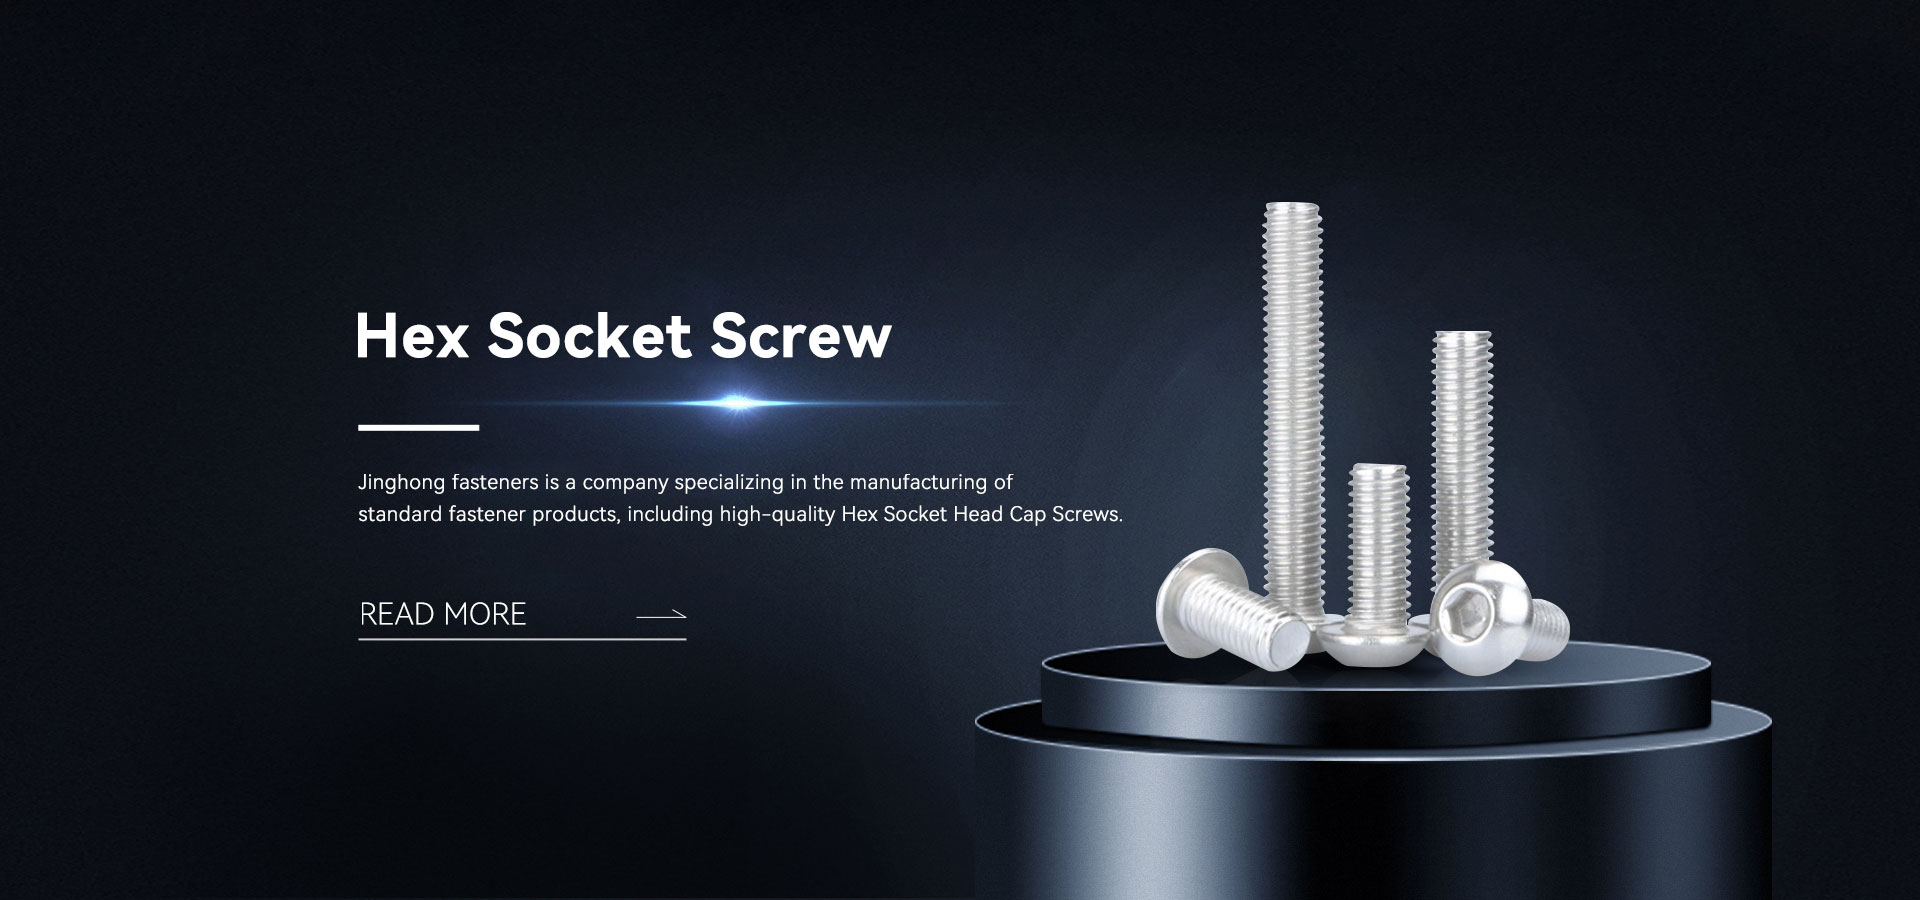 Hex Socket Screw Manufacturers and Suppliers